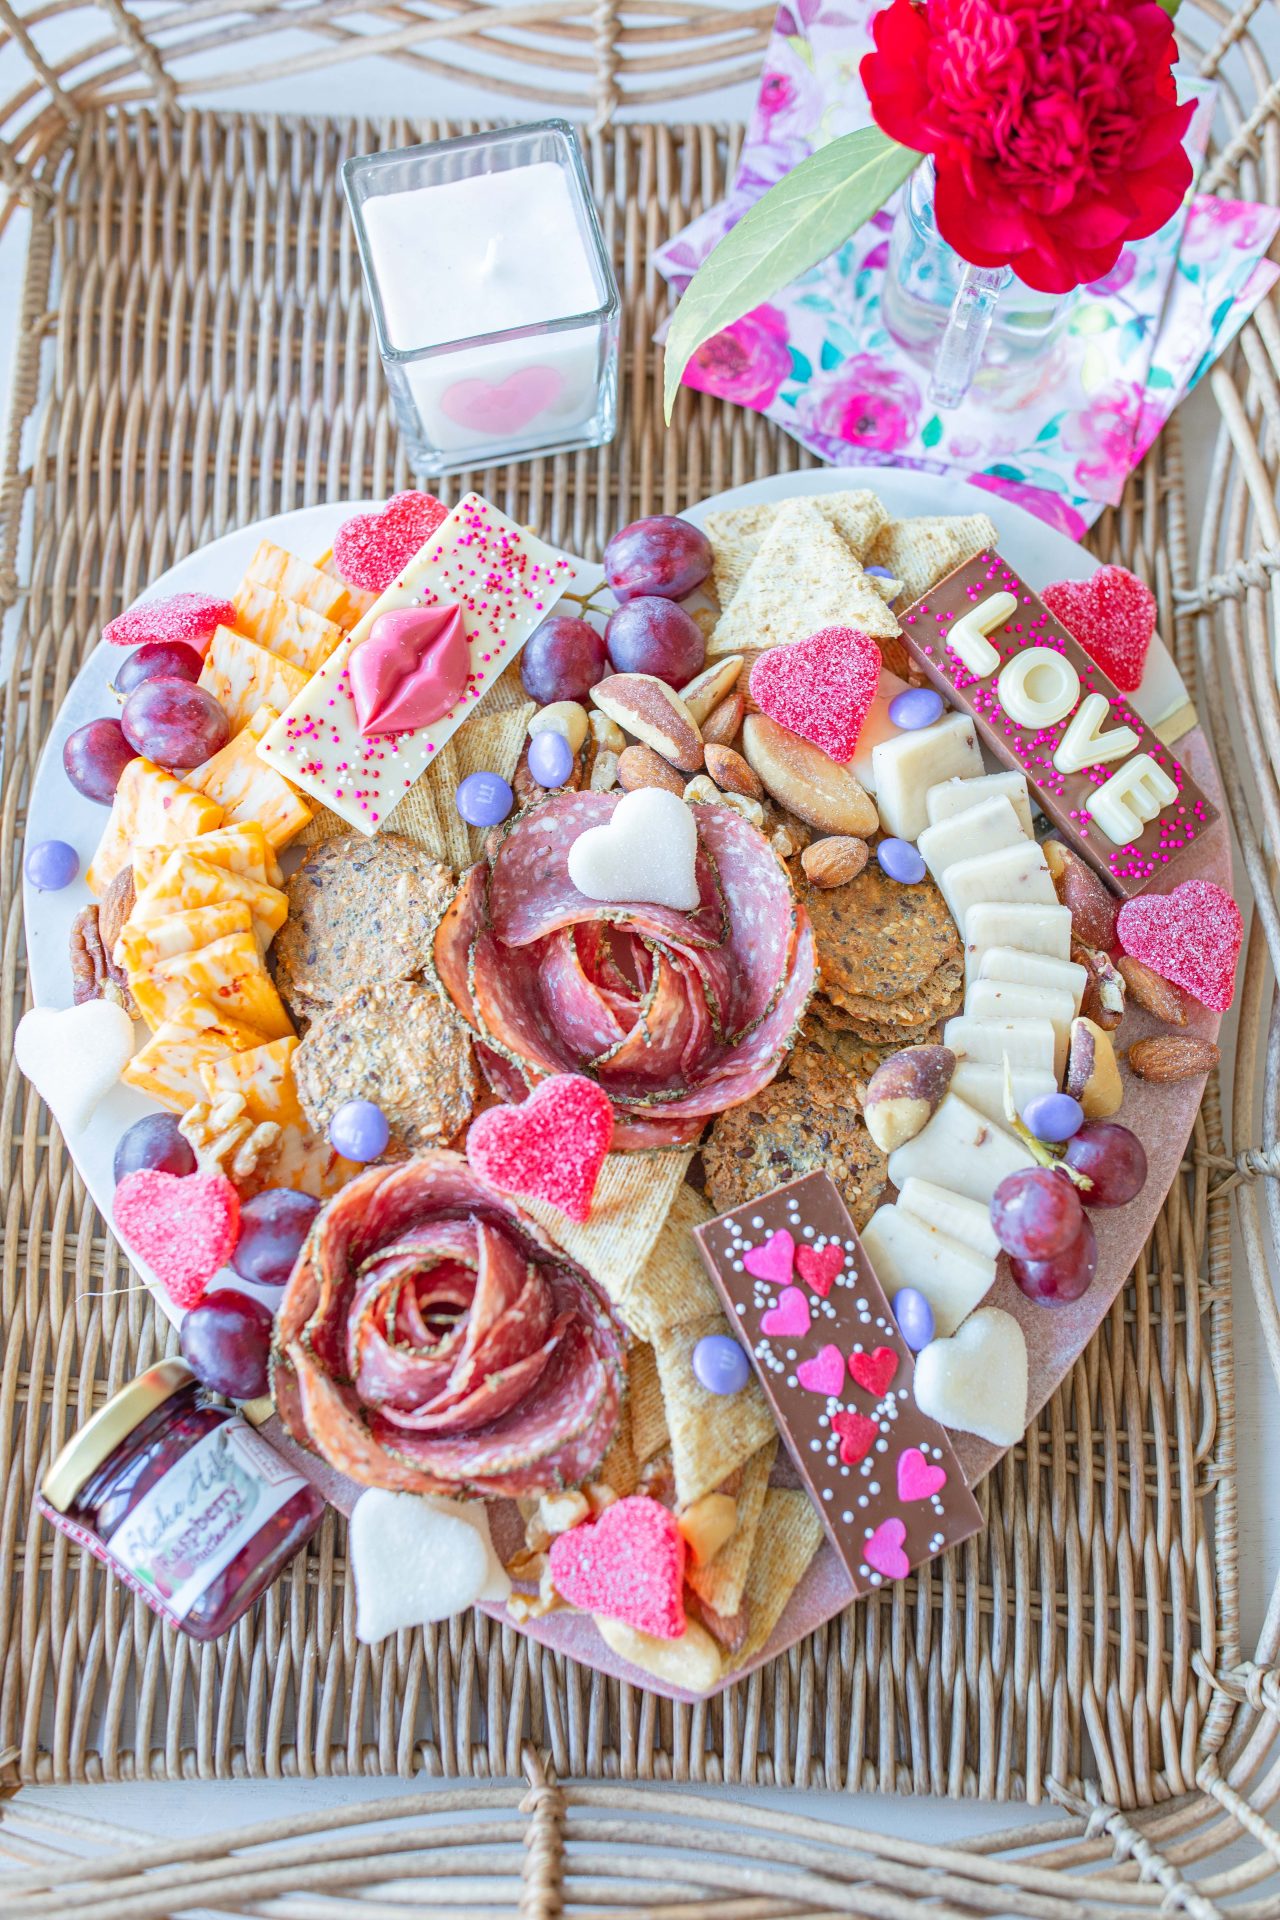 Charcuterie board, date night, valentines day, chocolates, baxter village chocolate, cheese board, meat and cheese, kombucha, date night board, valentines day recipe